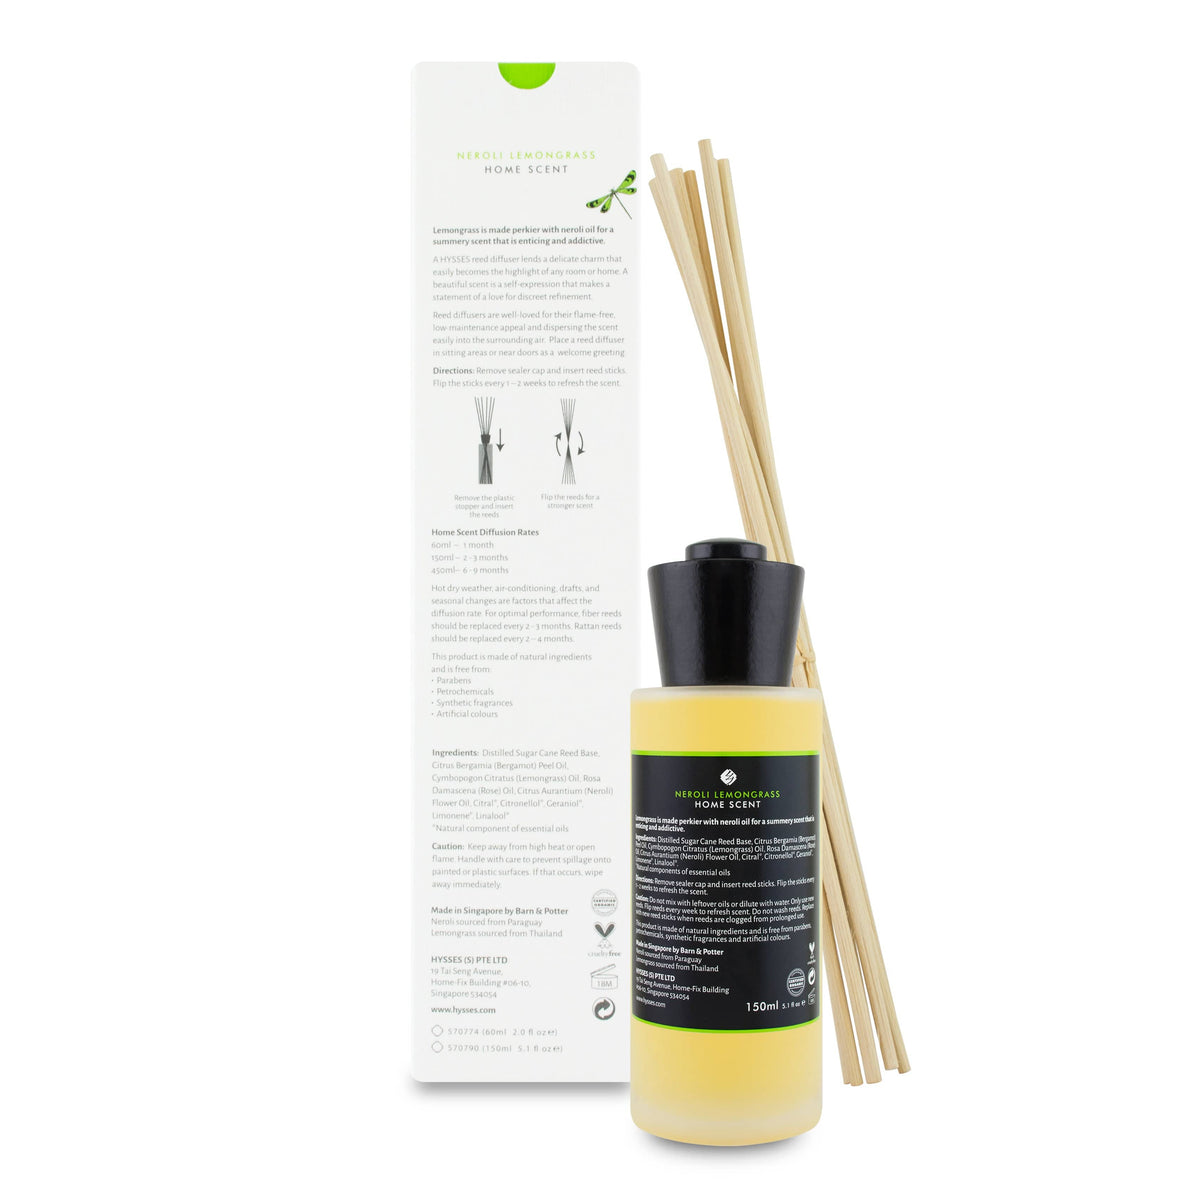 Hysses Home Scents Home Scent Reed Diffuser Neroli Lemongrass